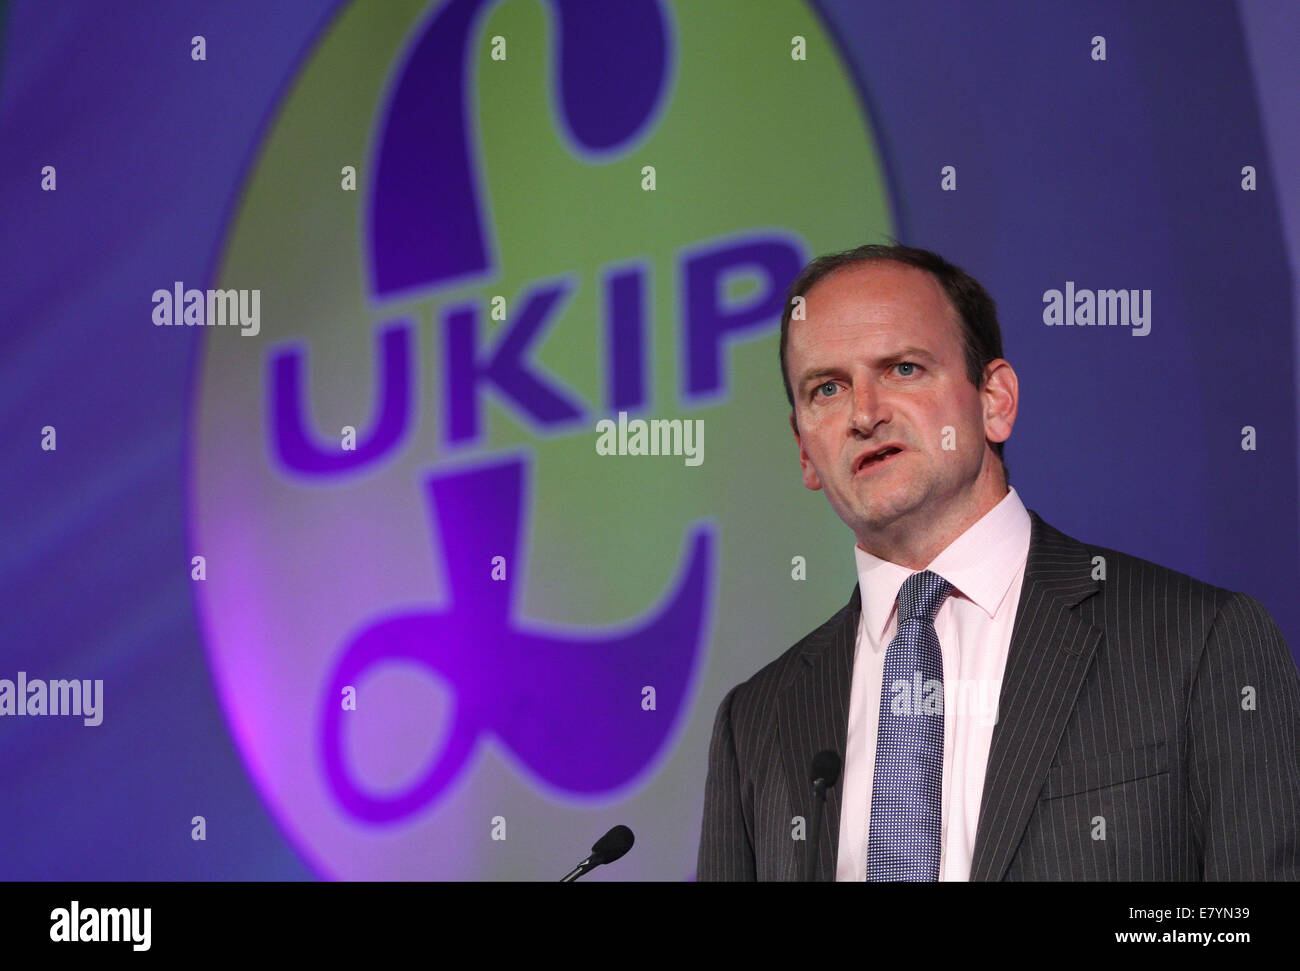 DOUGLAS CARSWELL UK INDEPENDENCE PARTY 26 September 2014 DONCASTER RACECOURSE DONCASTER YORKSHIRE ENGLAND Stock Photo